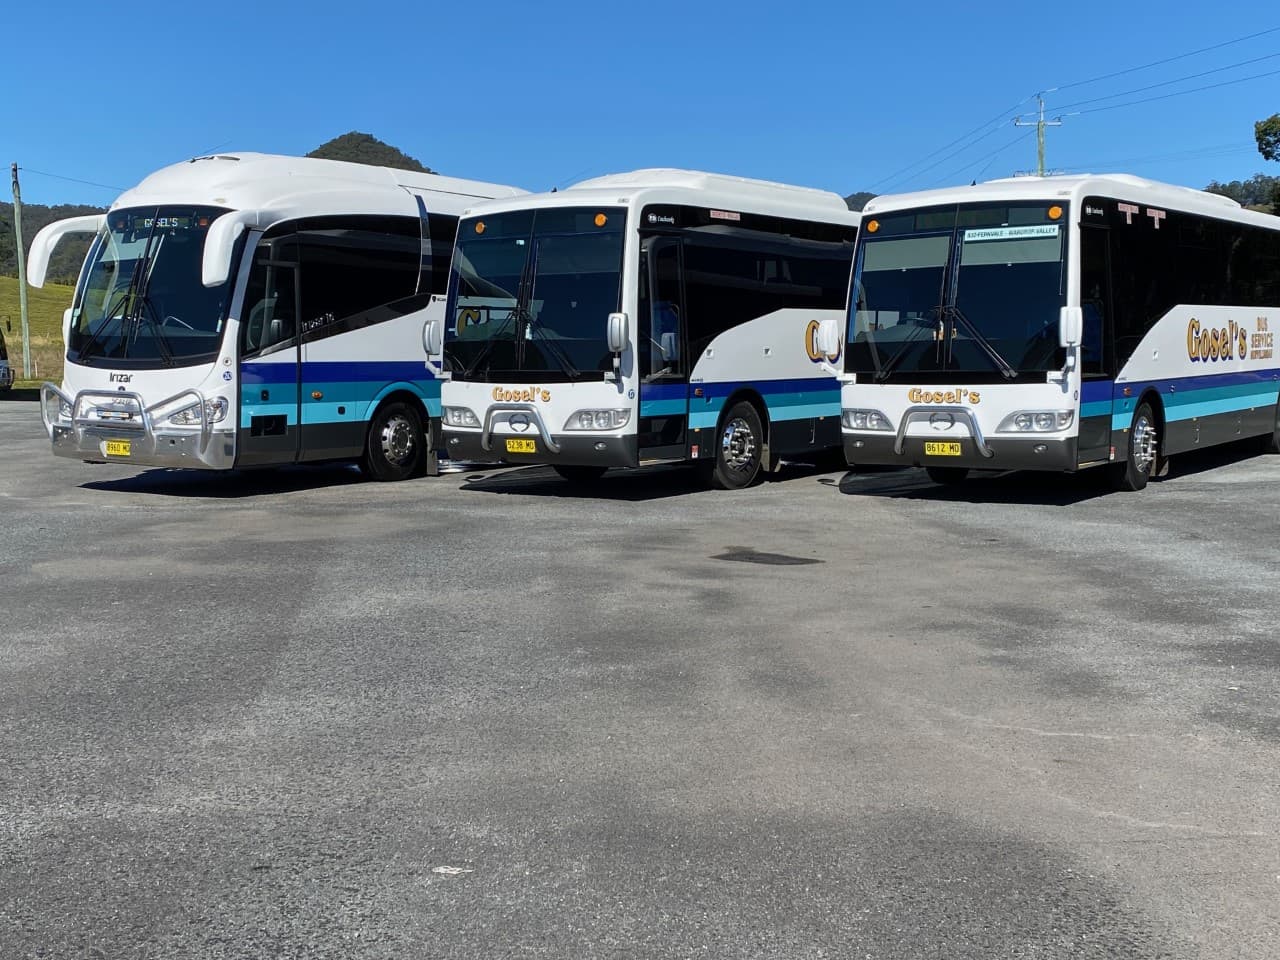 Bus Fleet for Day Trips — Bus Service Operates in the Tweed Shire, NSW